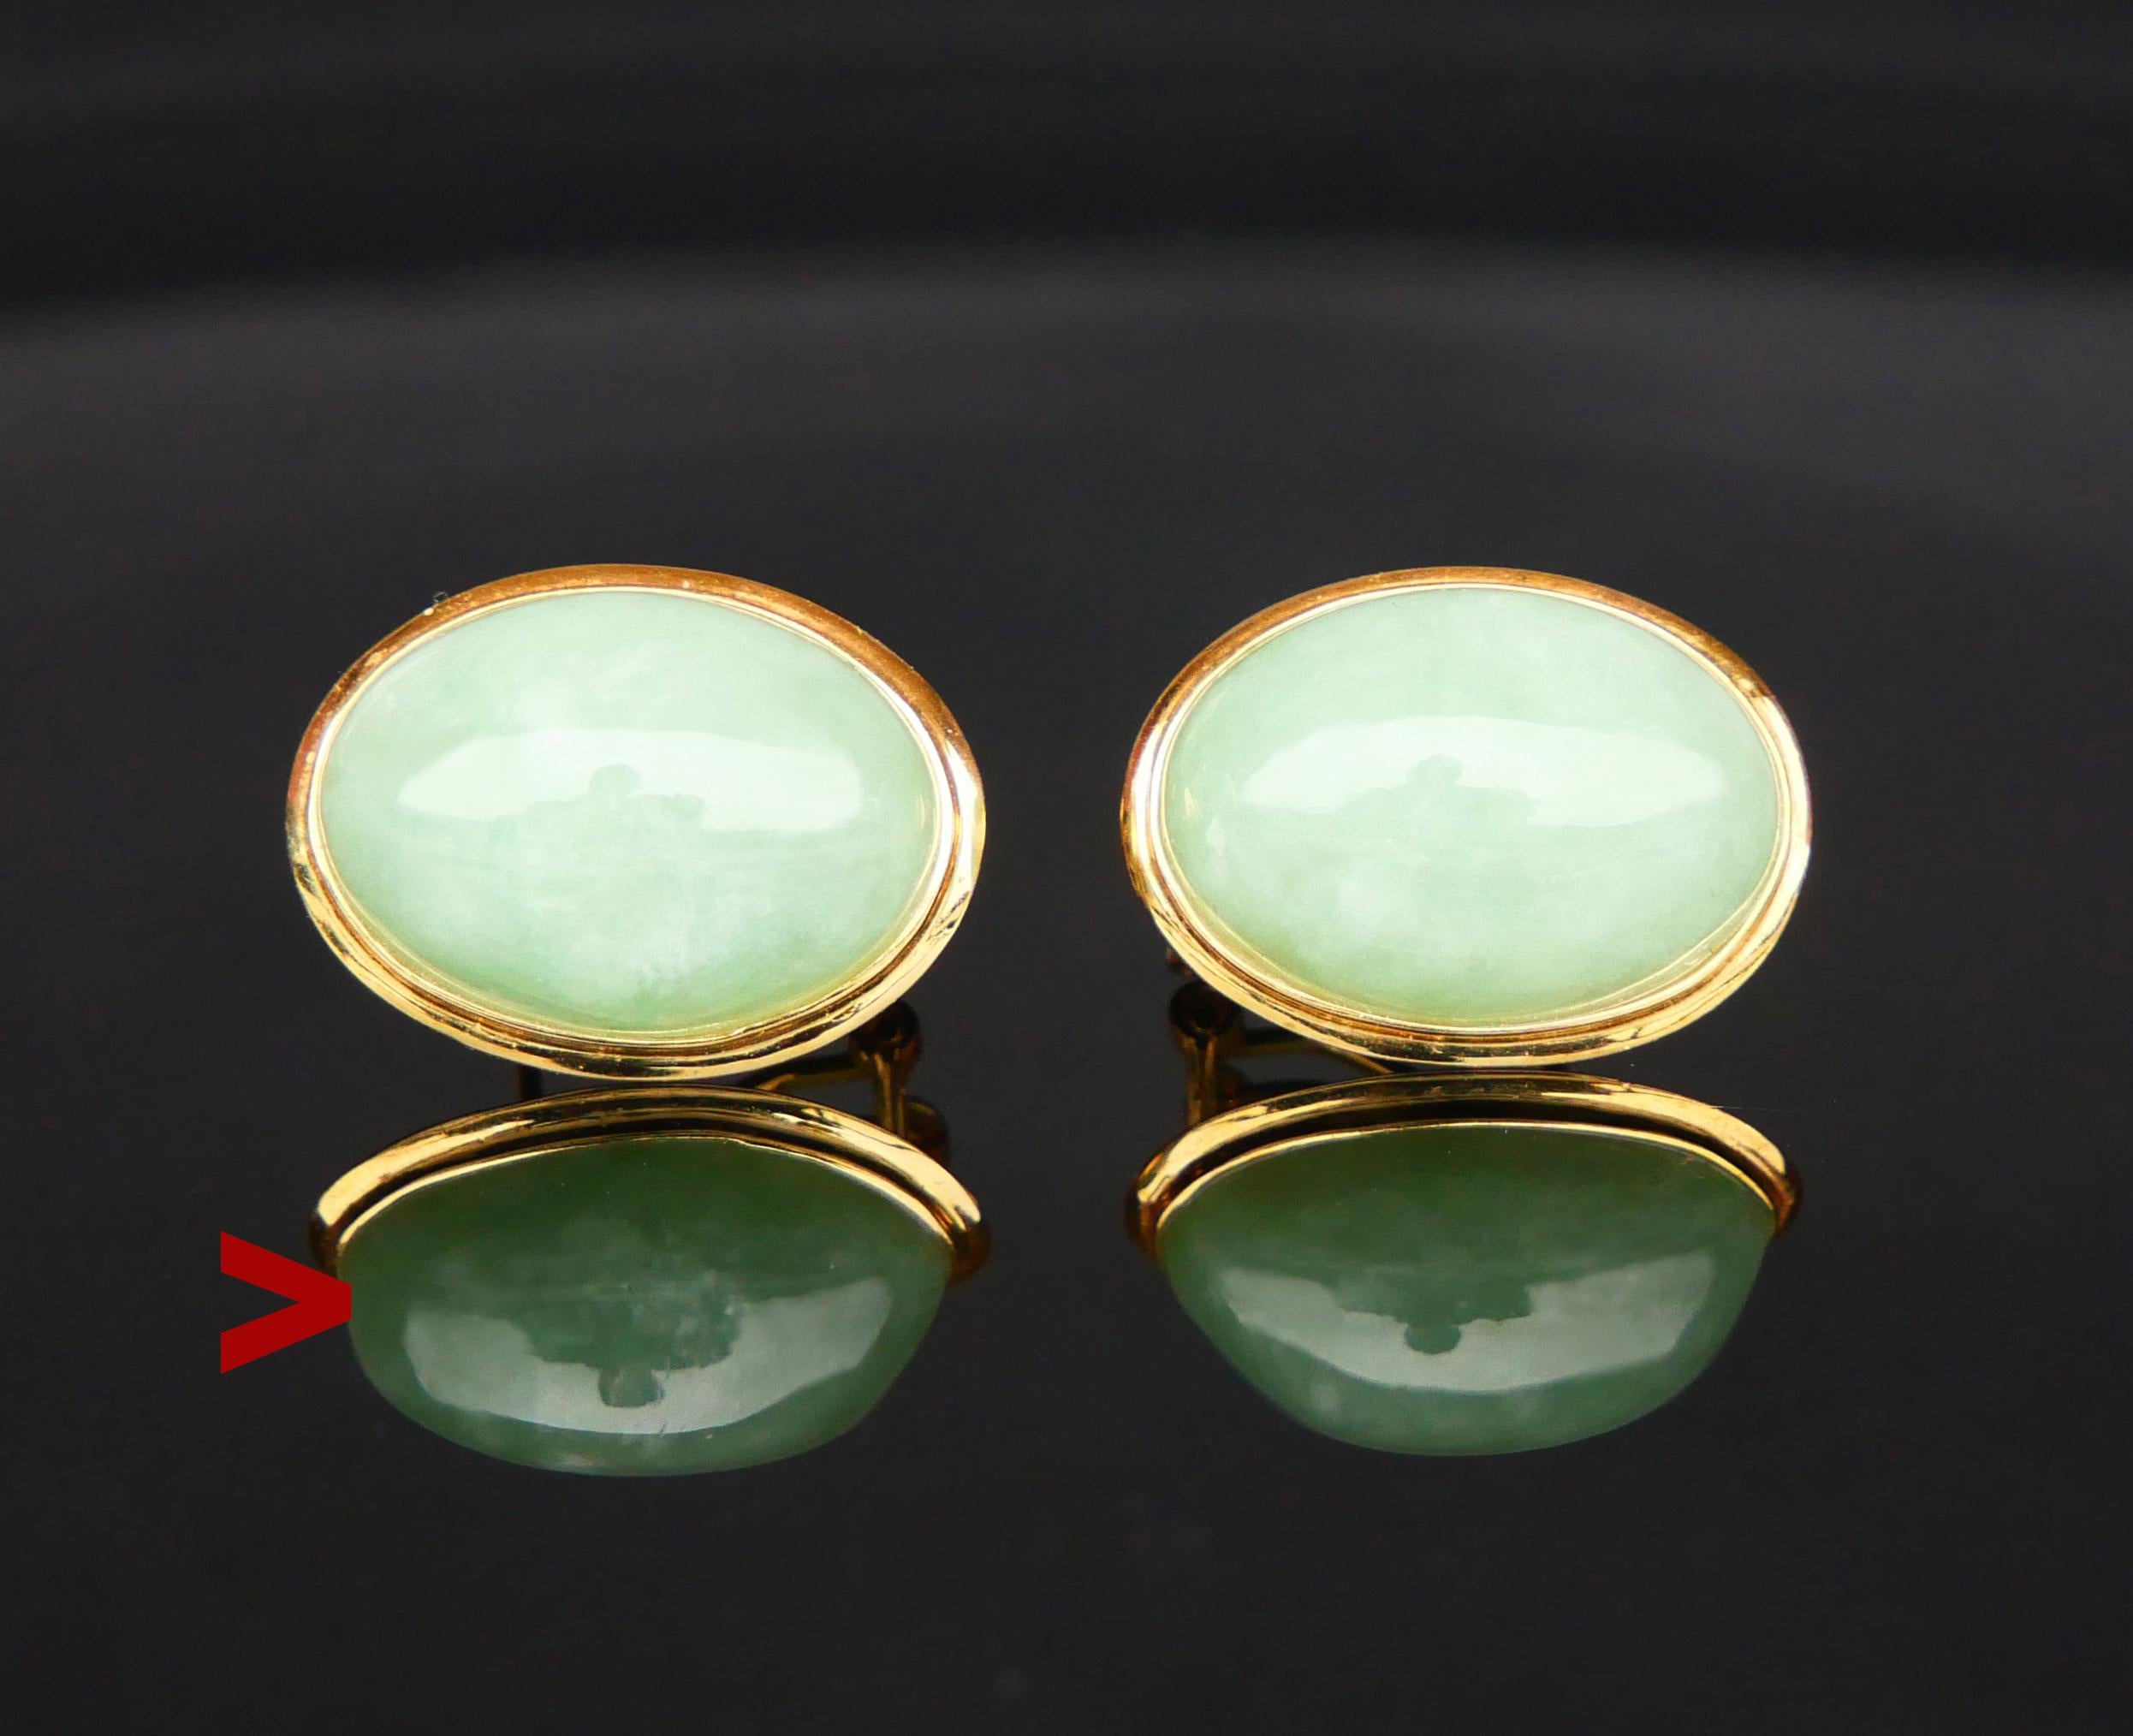 A pair of nice vintage clips in solid 14K Yellow Gold with bezel set cabochons of natural translucent Celadon colored Jade stones 17 mm x 13 mm x 7. 25 mm deep or ca. 13 ct each. These stones look a bit bluish in natural light.

Each bezel 20 mm x